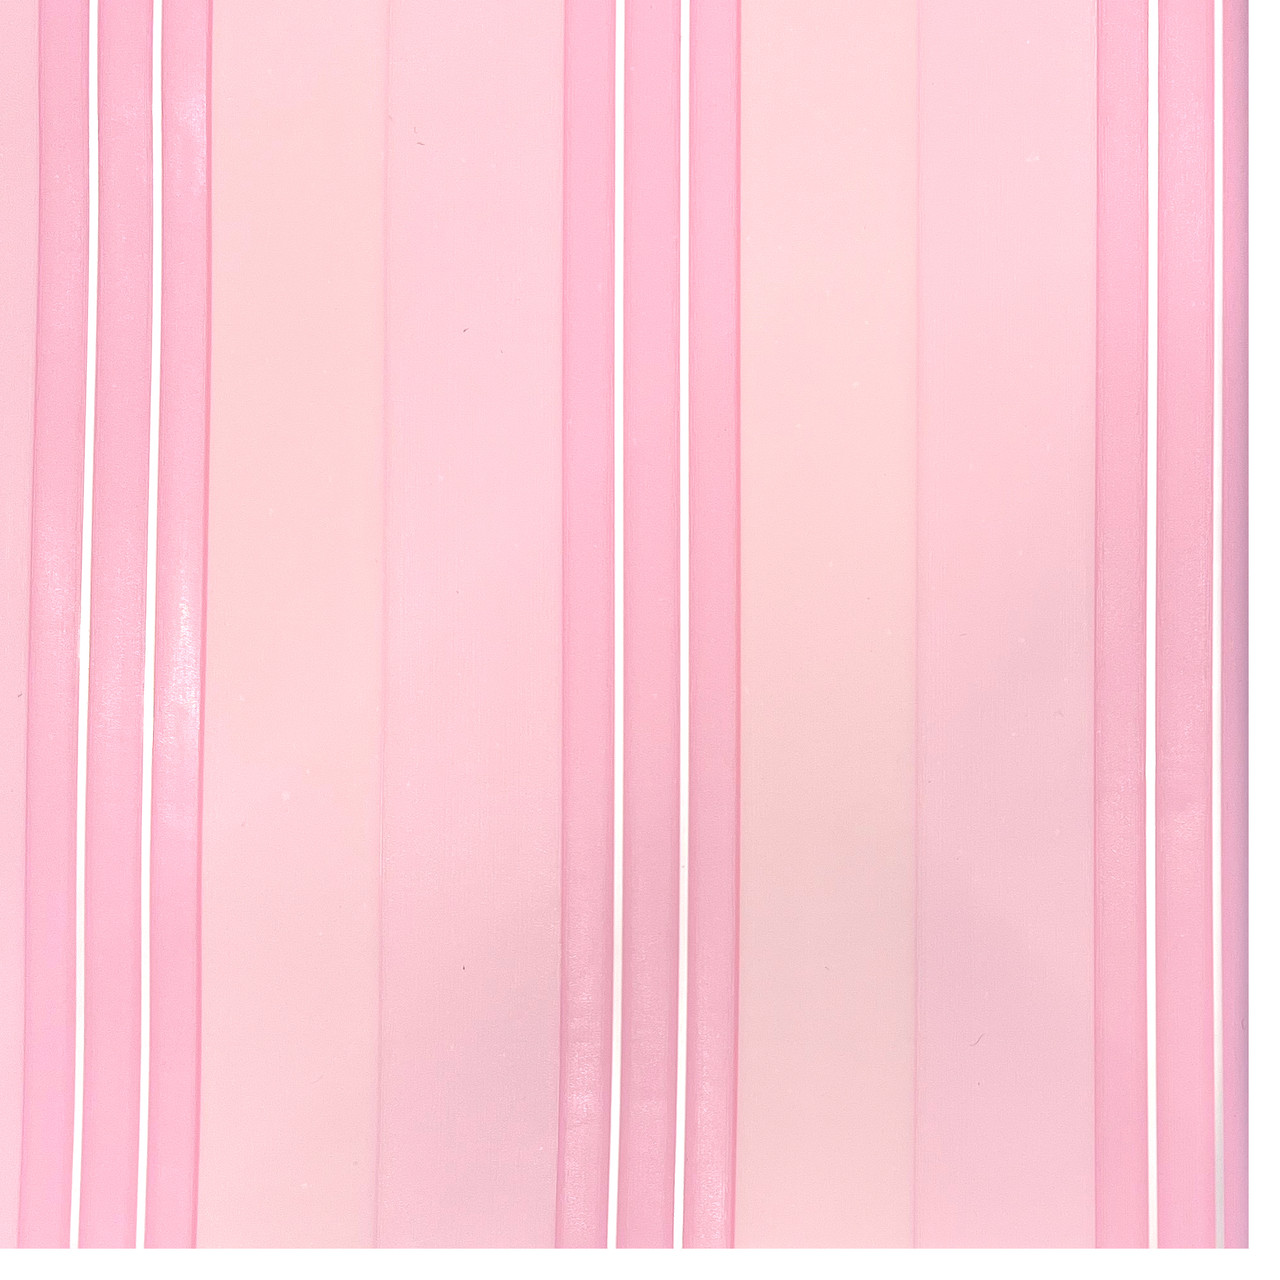 Bubble Gum Pink Floral Wrapping Paper - 20 Sheets - LO Florist Supplies